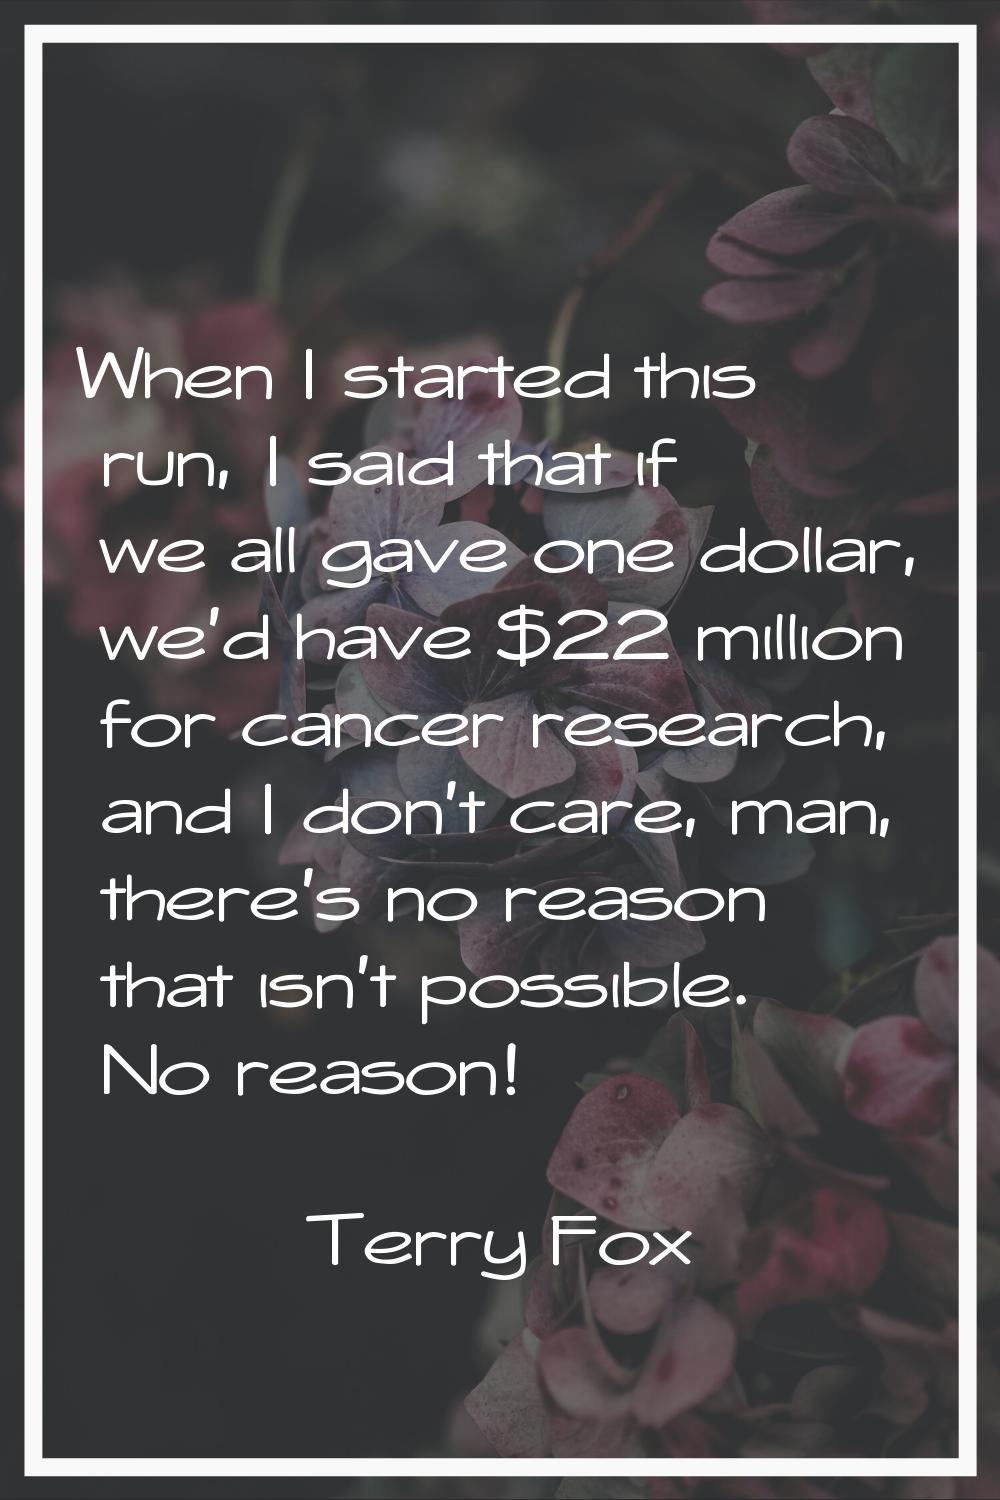 When I started this run, I said that if we all gave one dollar, we'd have $22 million for cancer re